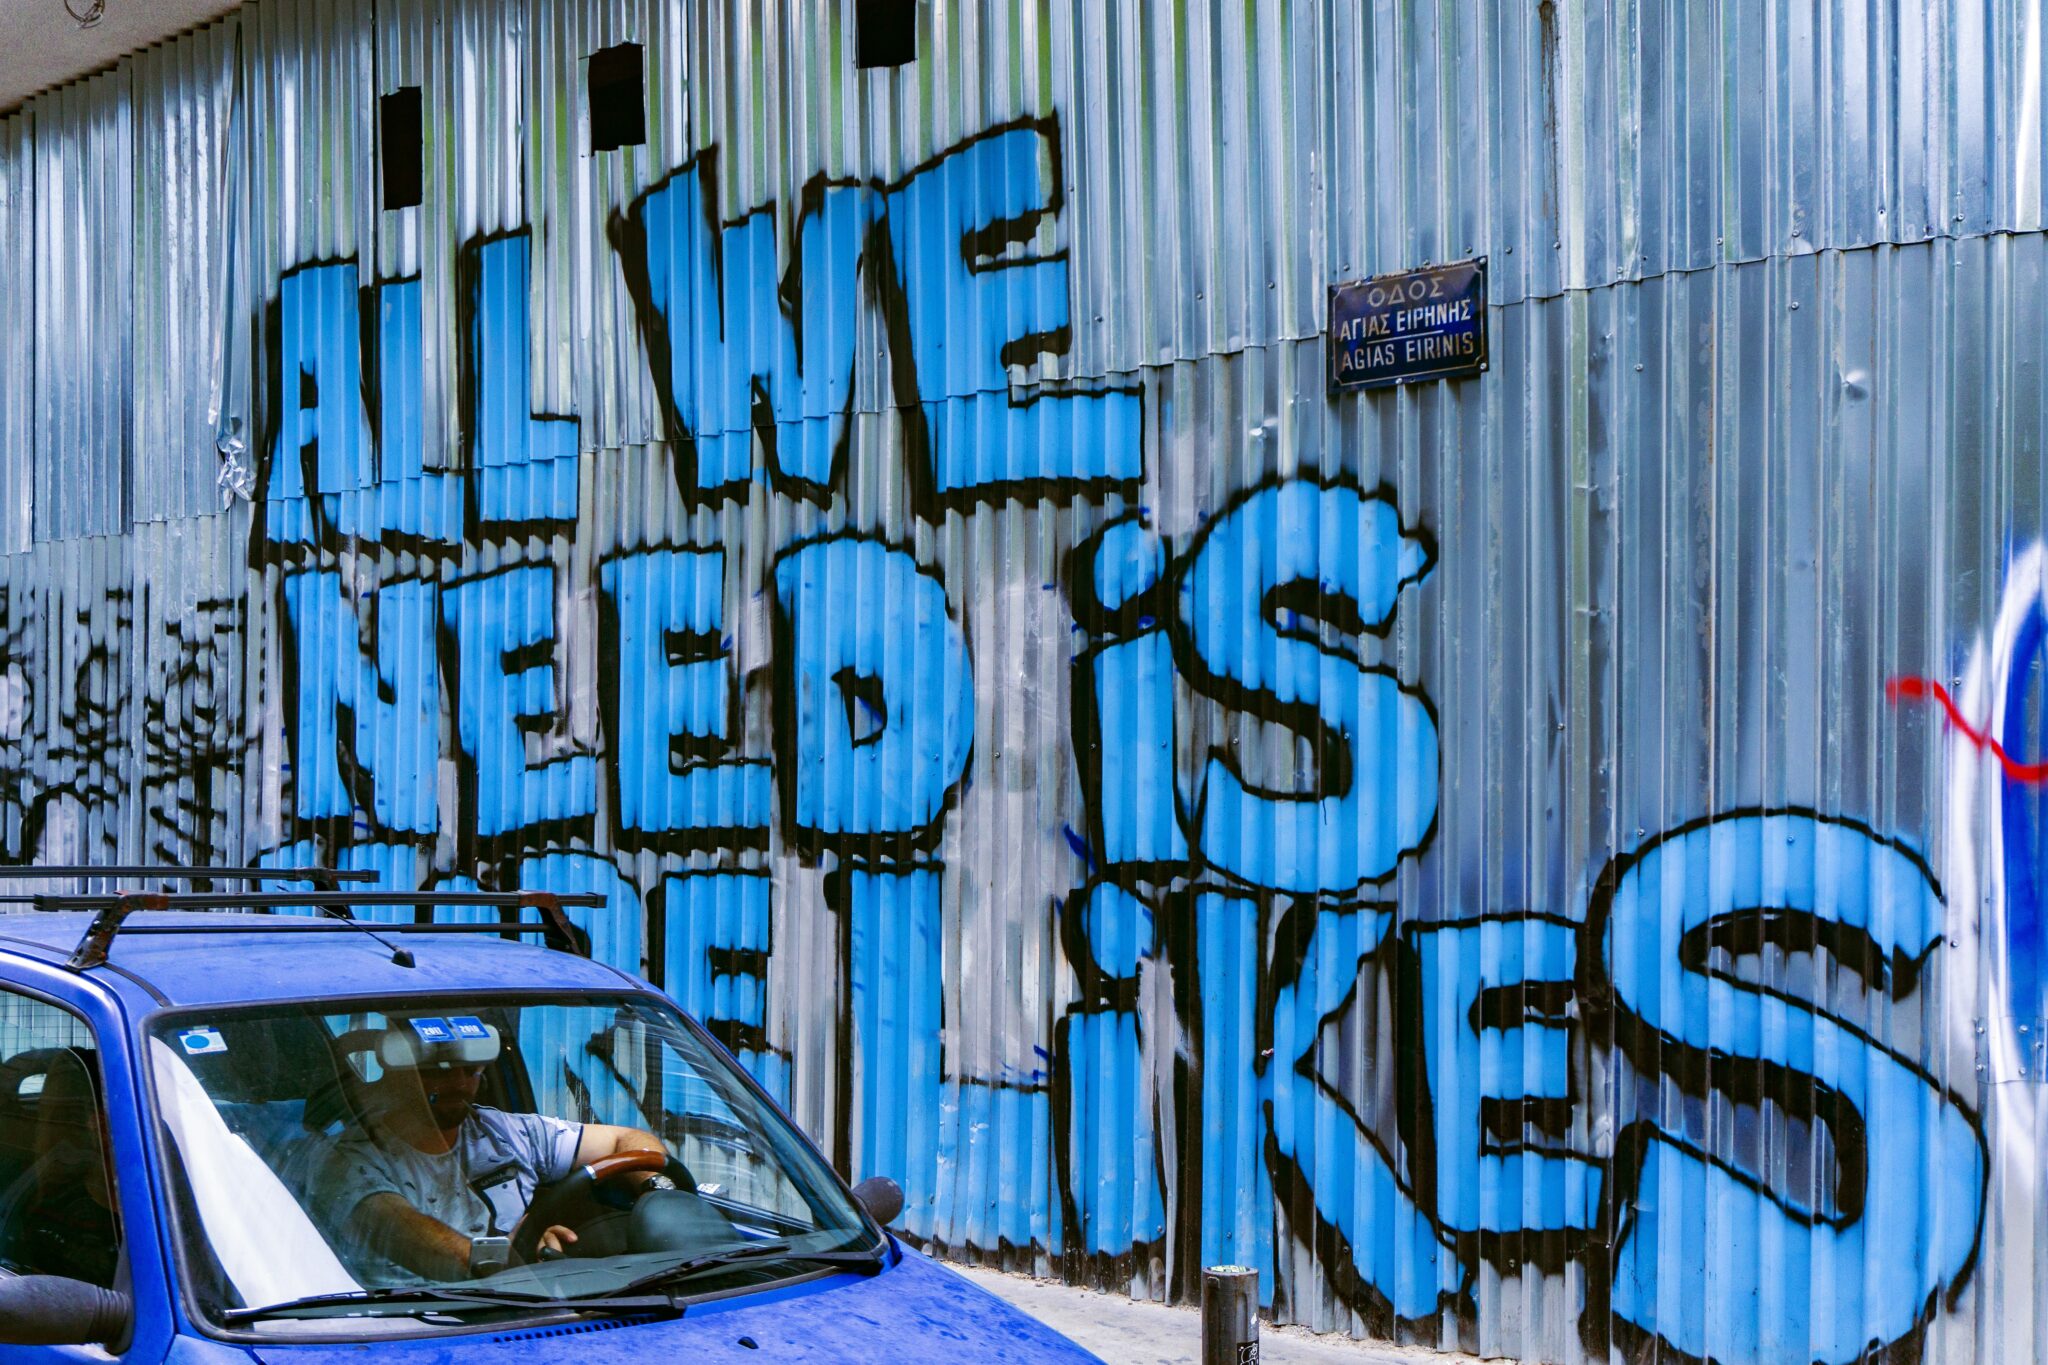 Graffito "ALL WE NEED IS MORE LIKES"